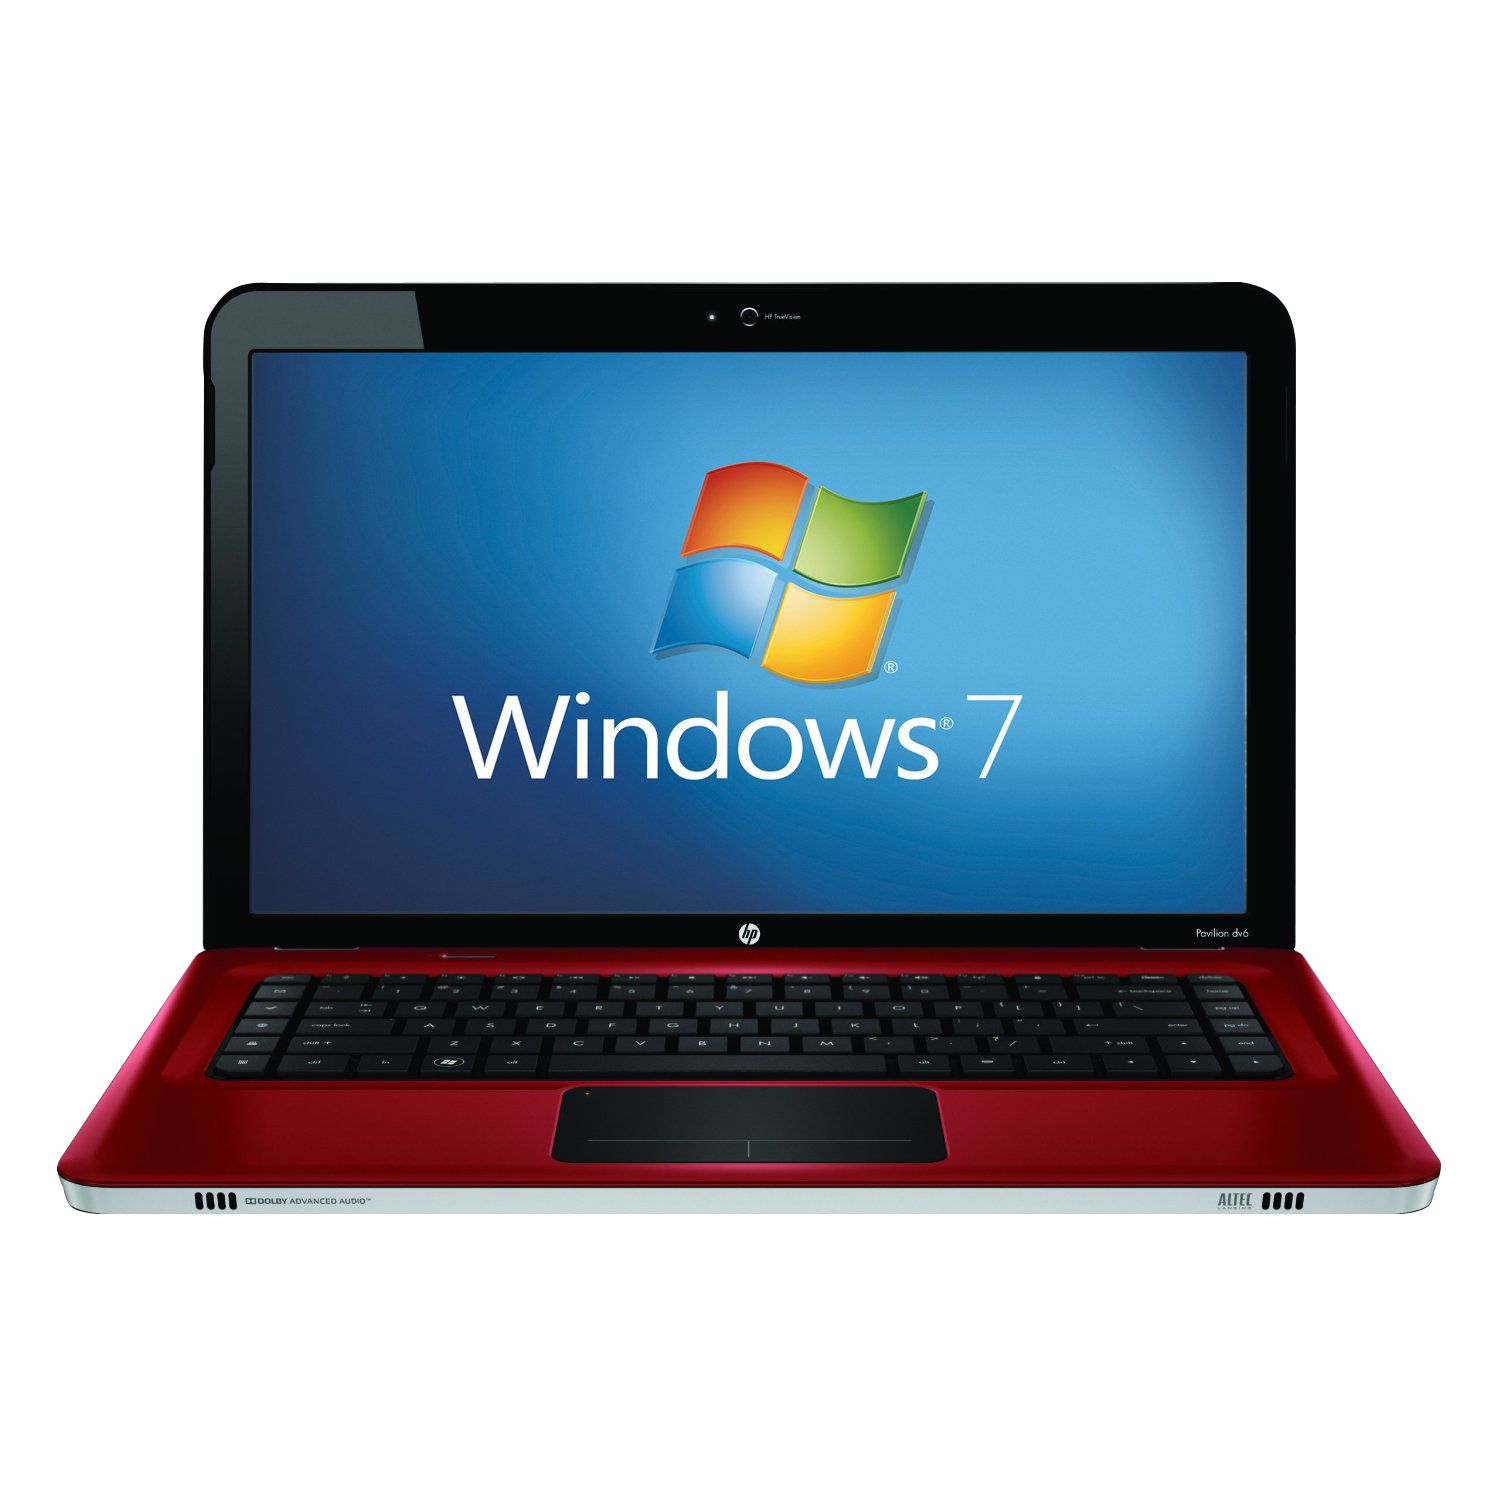 HP Pavilion DV6-3125SA Laptop, Intel Core i5, 500GB, 2.5GHz, 4GB RAM with 15.6 Inch Display, Red at JohnLewis